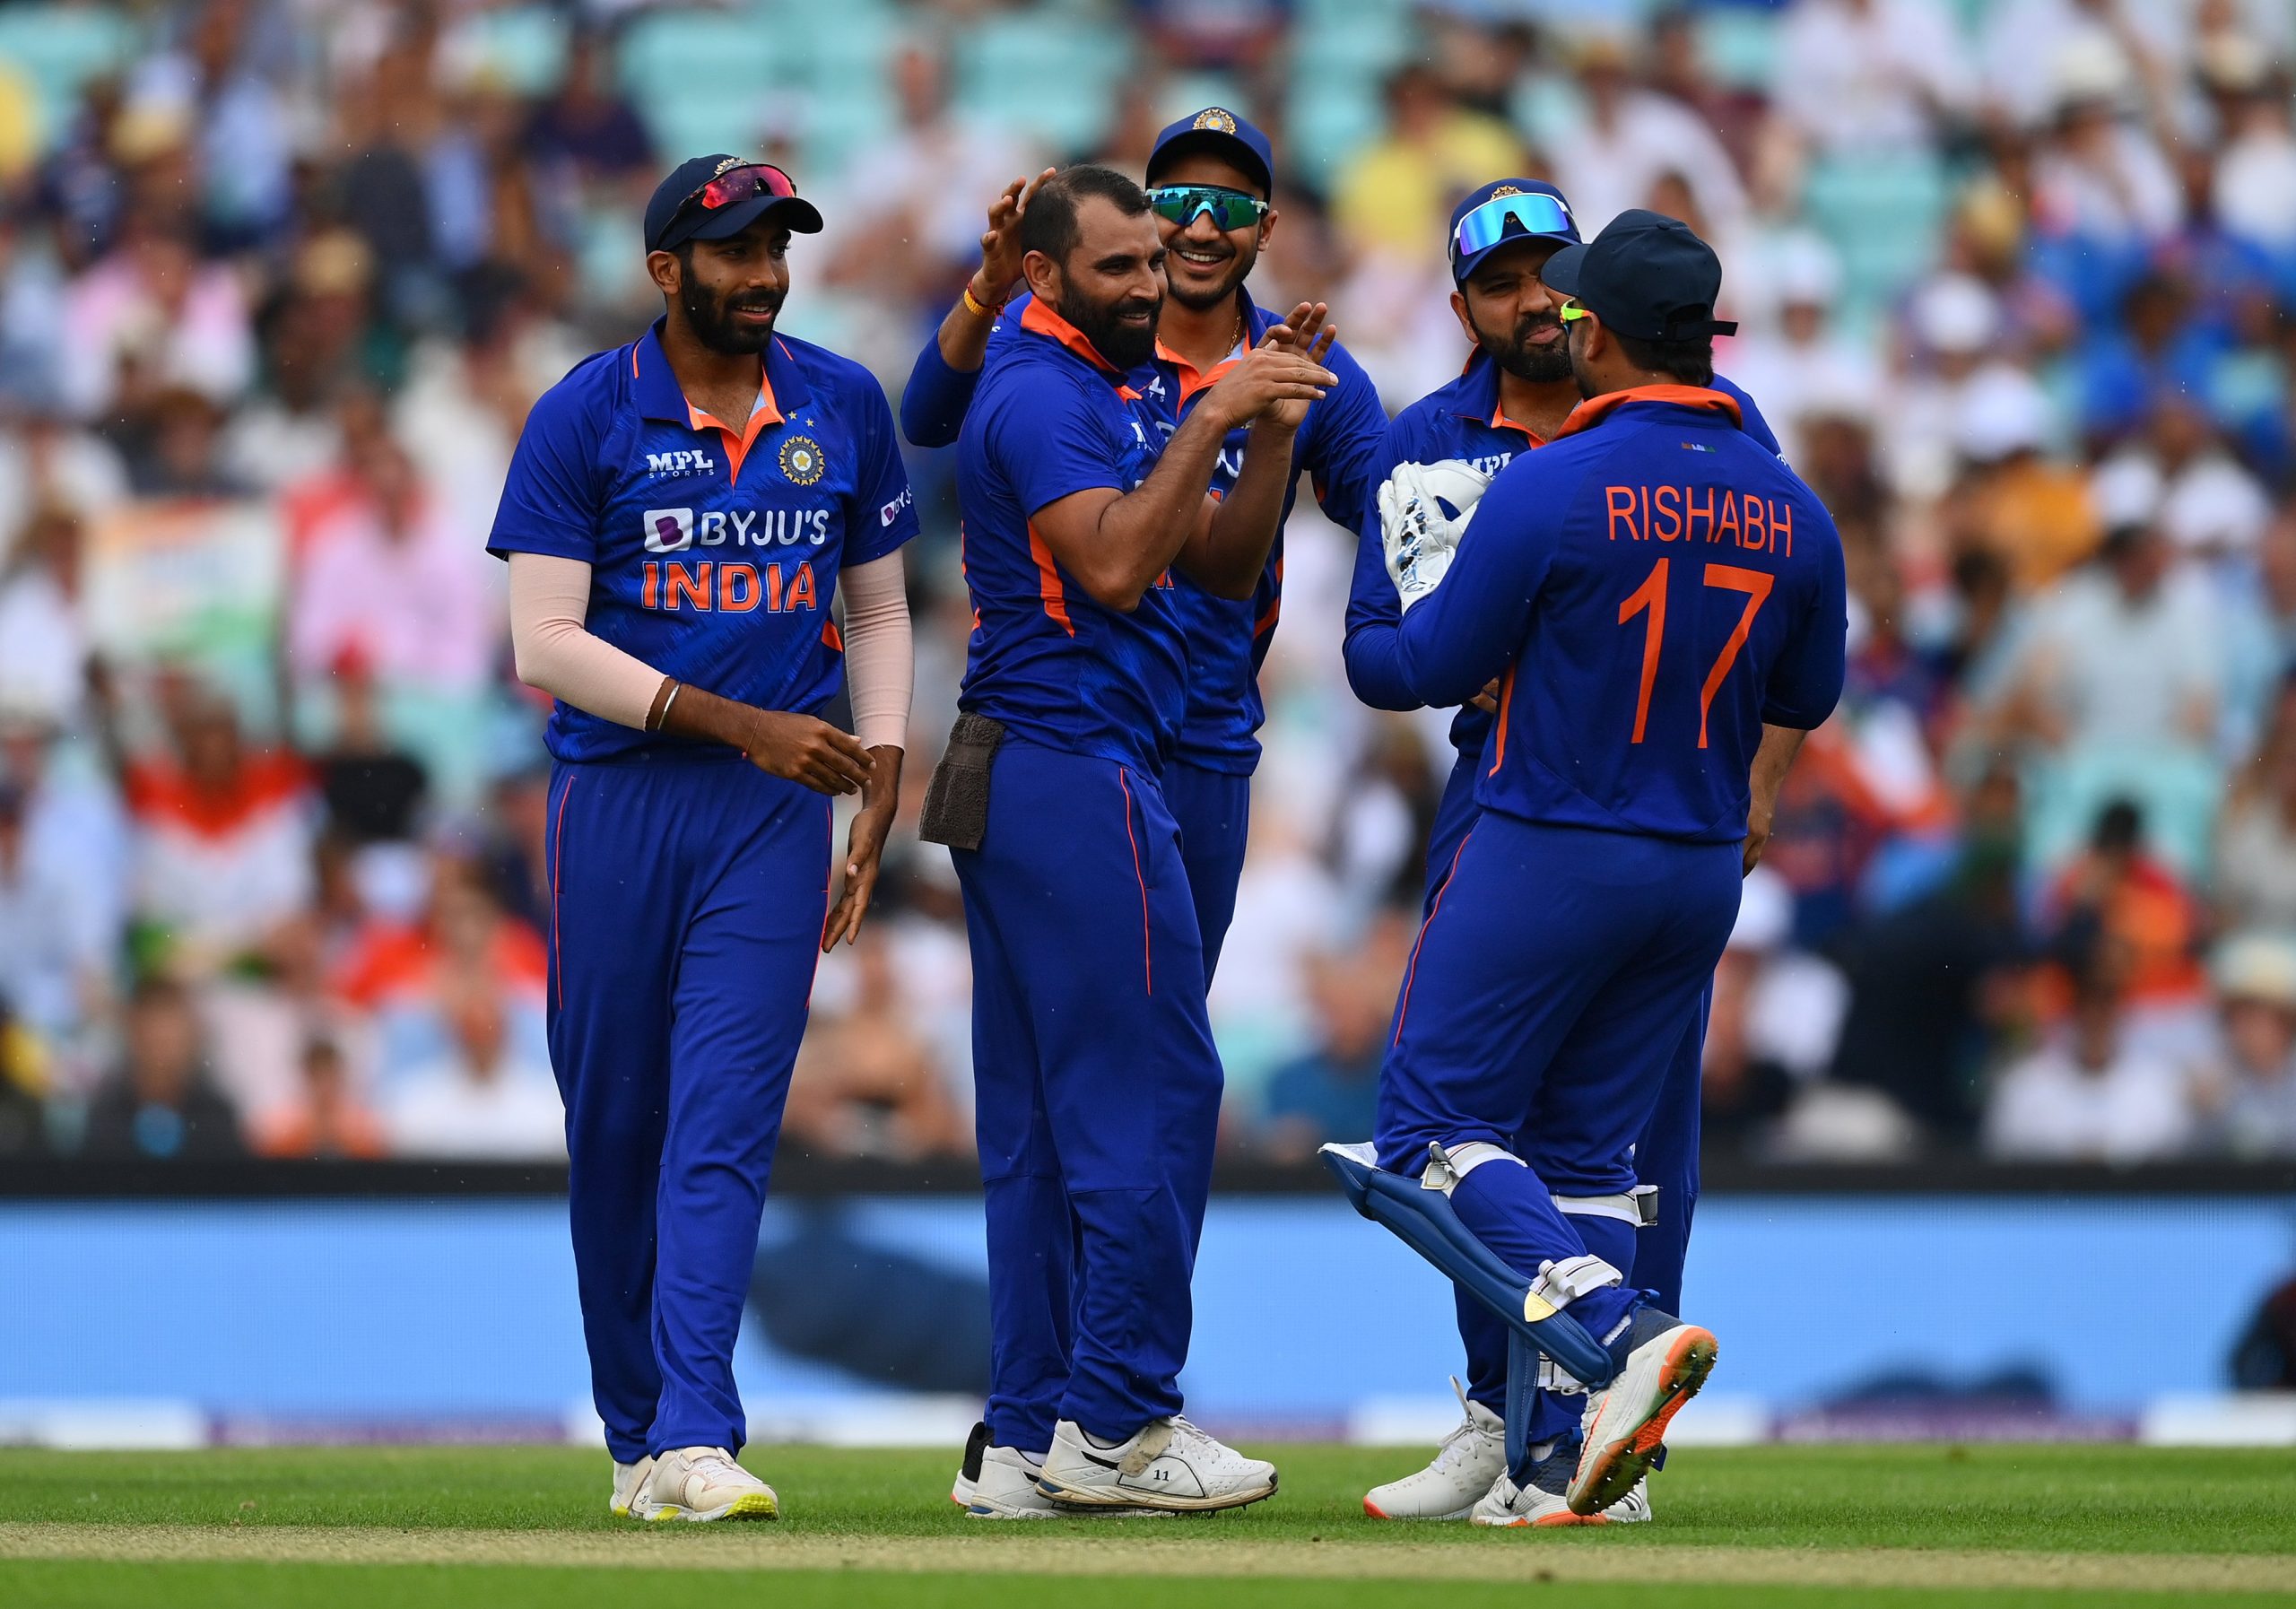 IND vs ENG 1st ODI Review: Bumrah's record figures help India cruise their way to a 1-0 lead